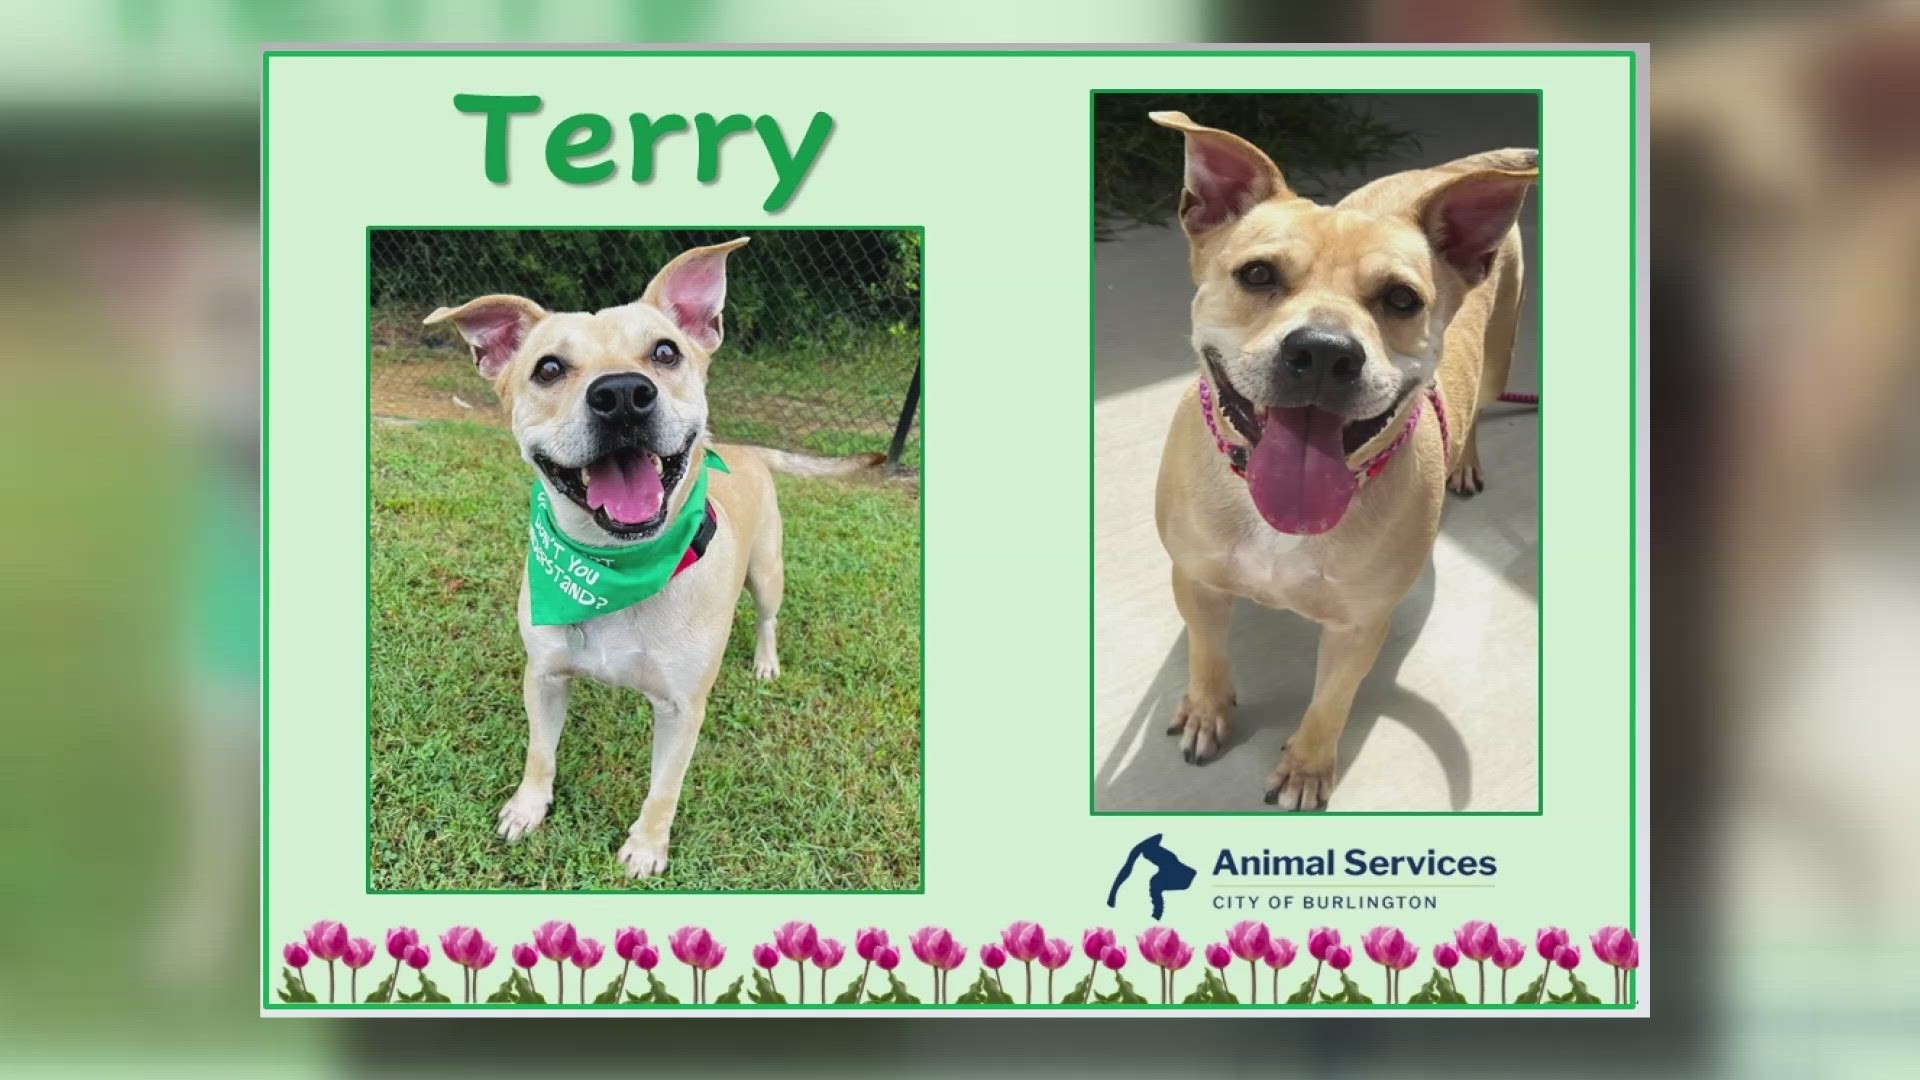 Let's get Terry adopted!